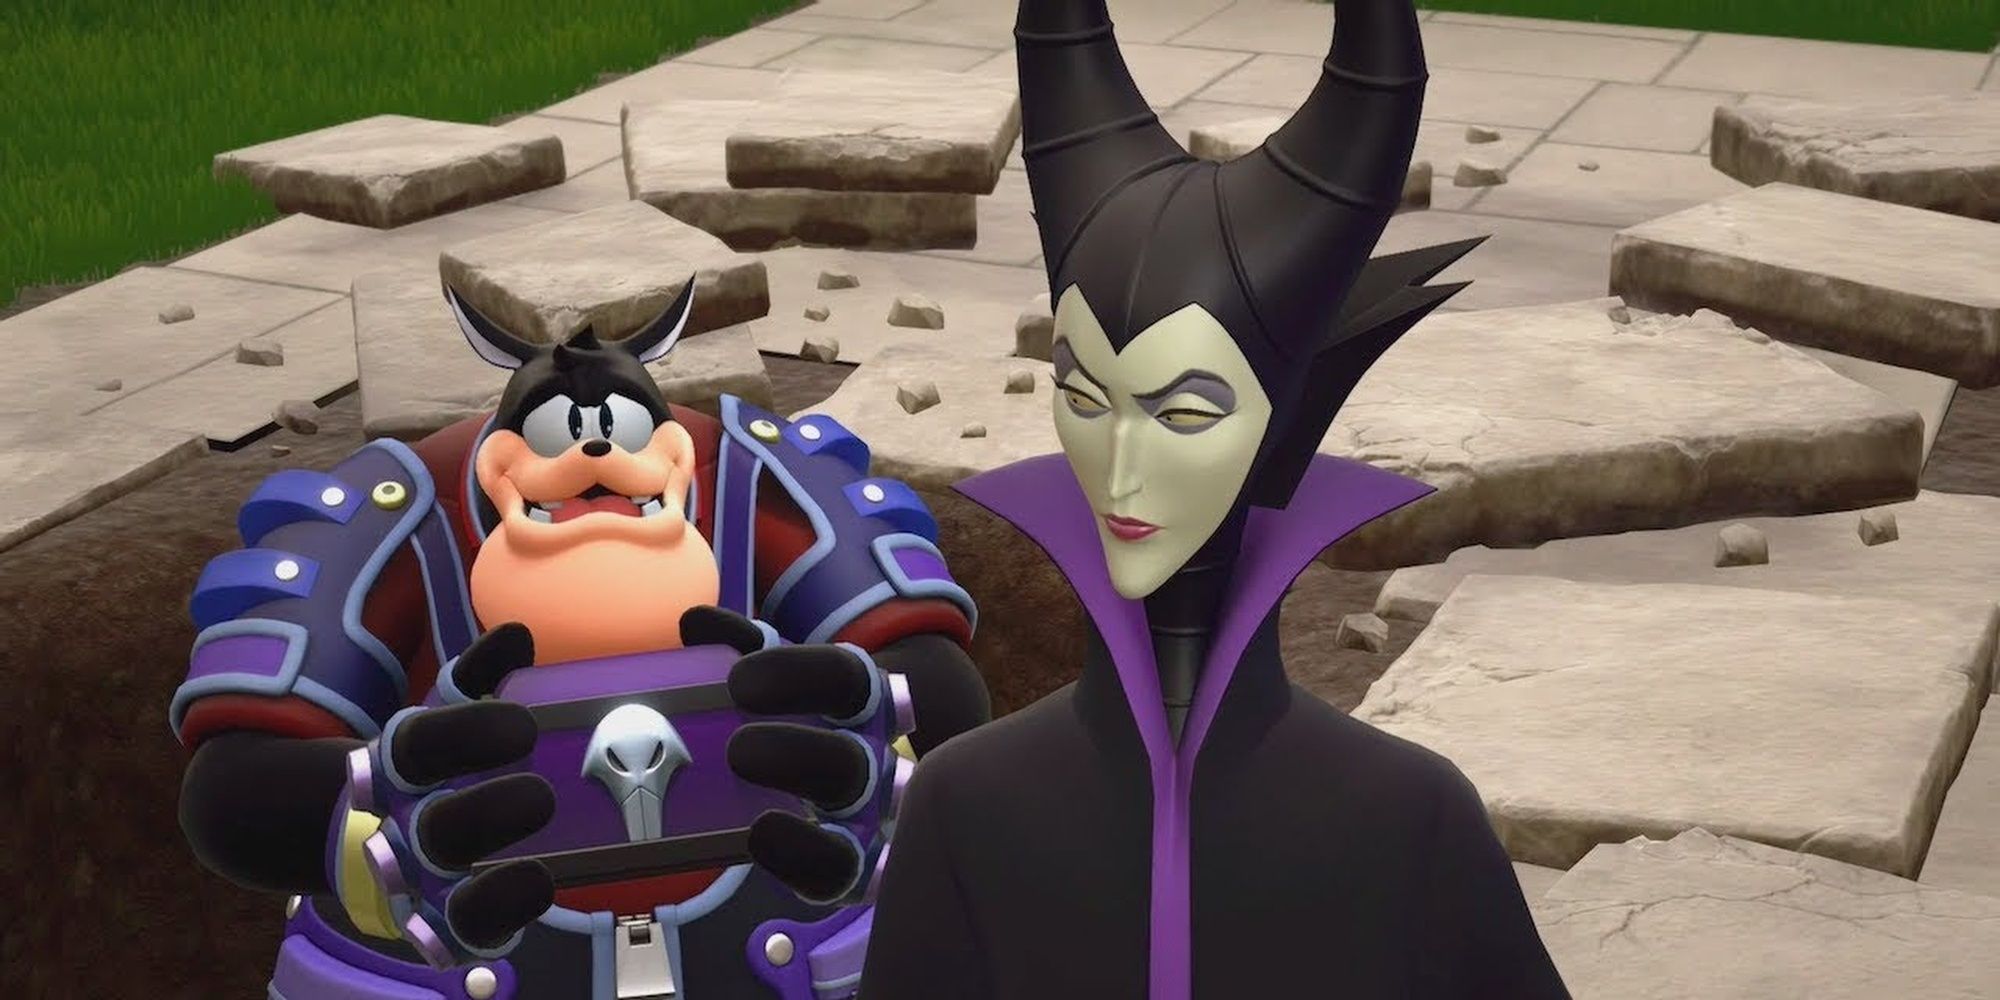 Maleficent and her minion Pete in Kingdom Hearts 3